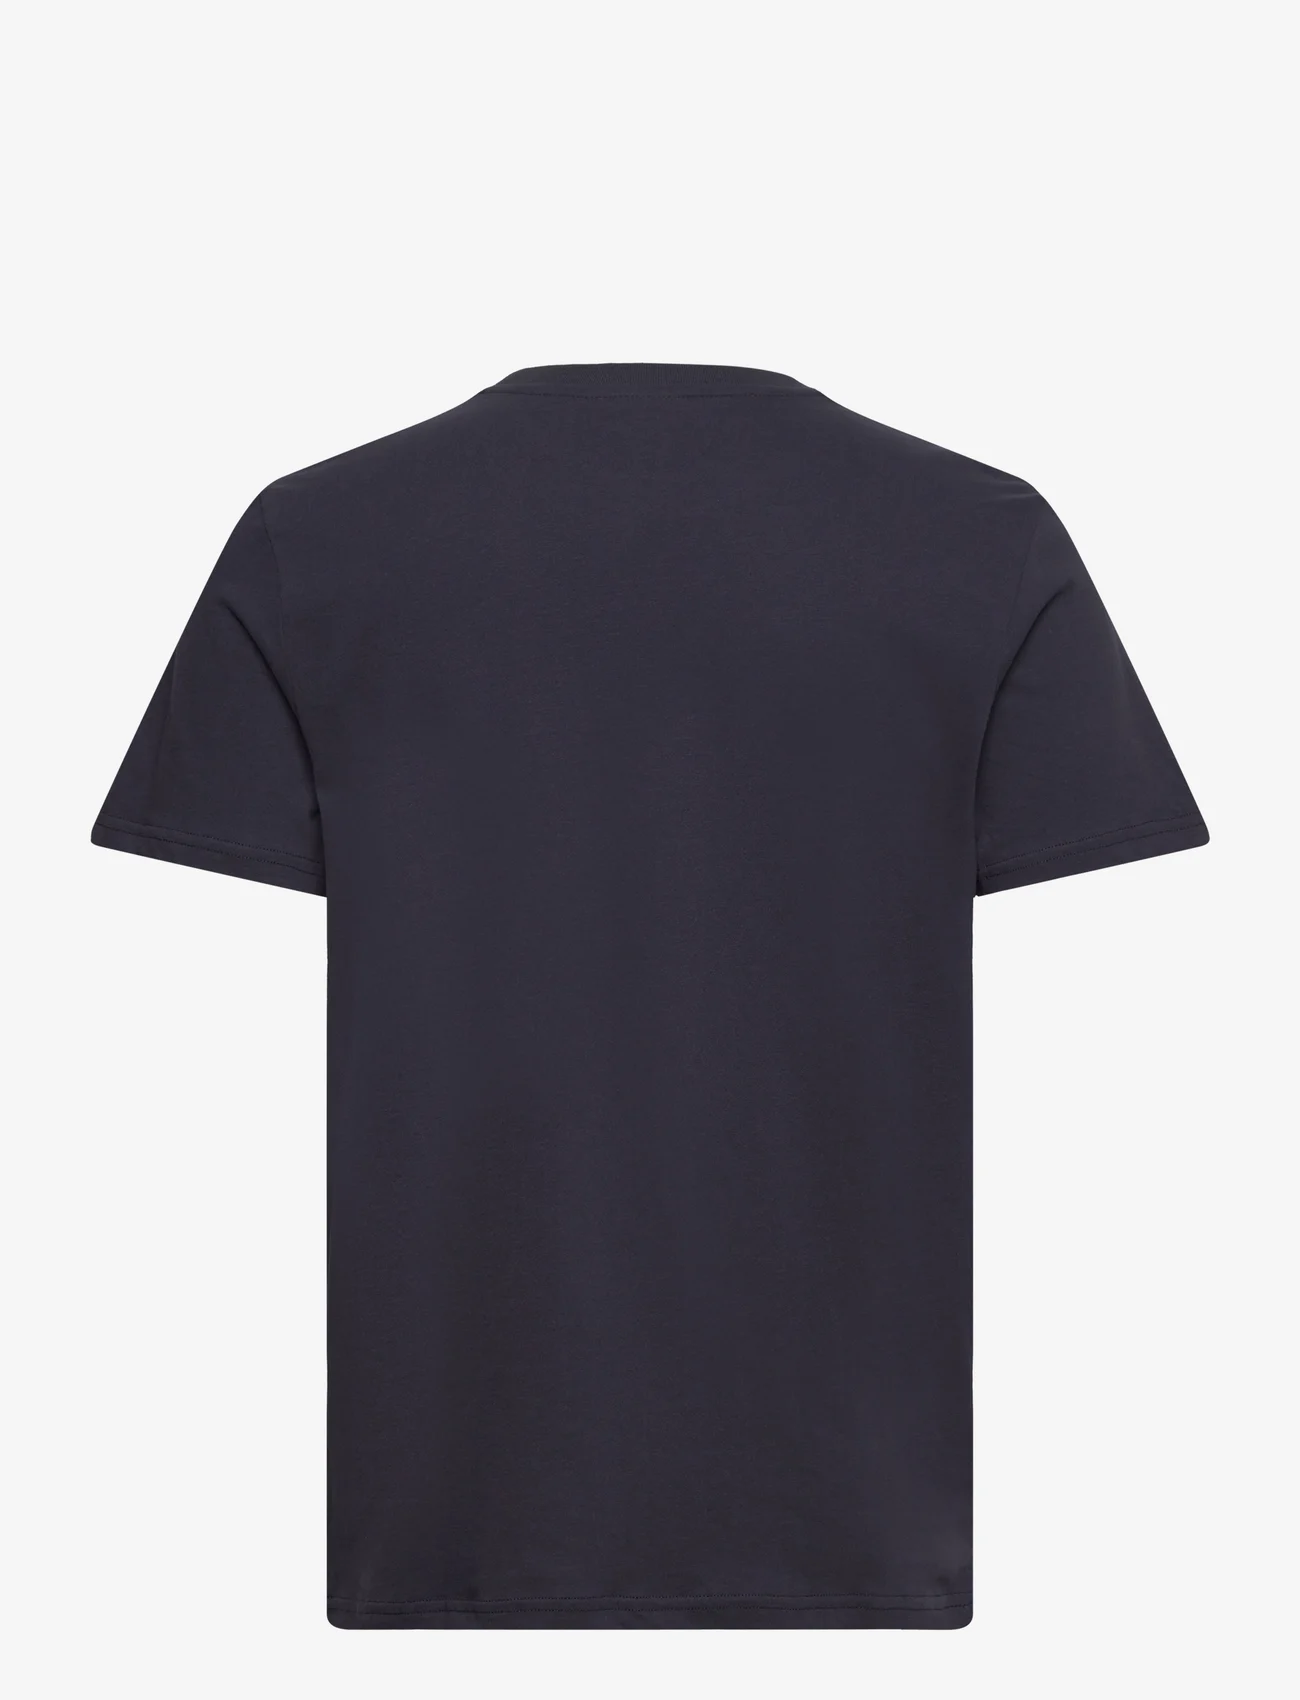 Superdry - NEON VL T SHIRT - lowest prices - french navy - 1